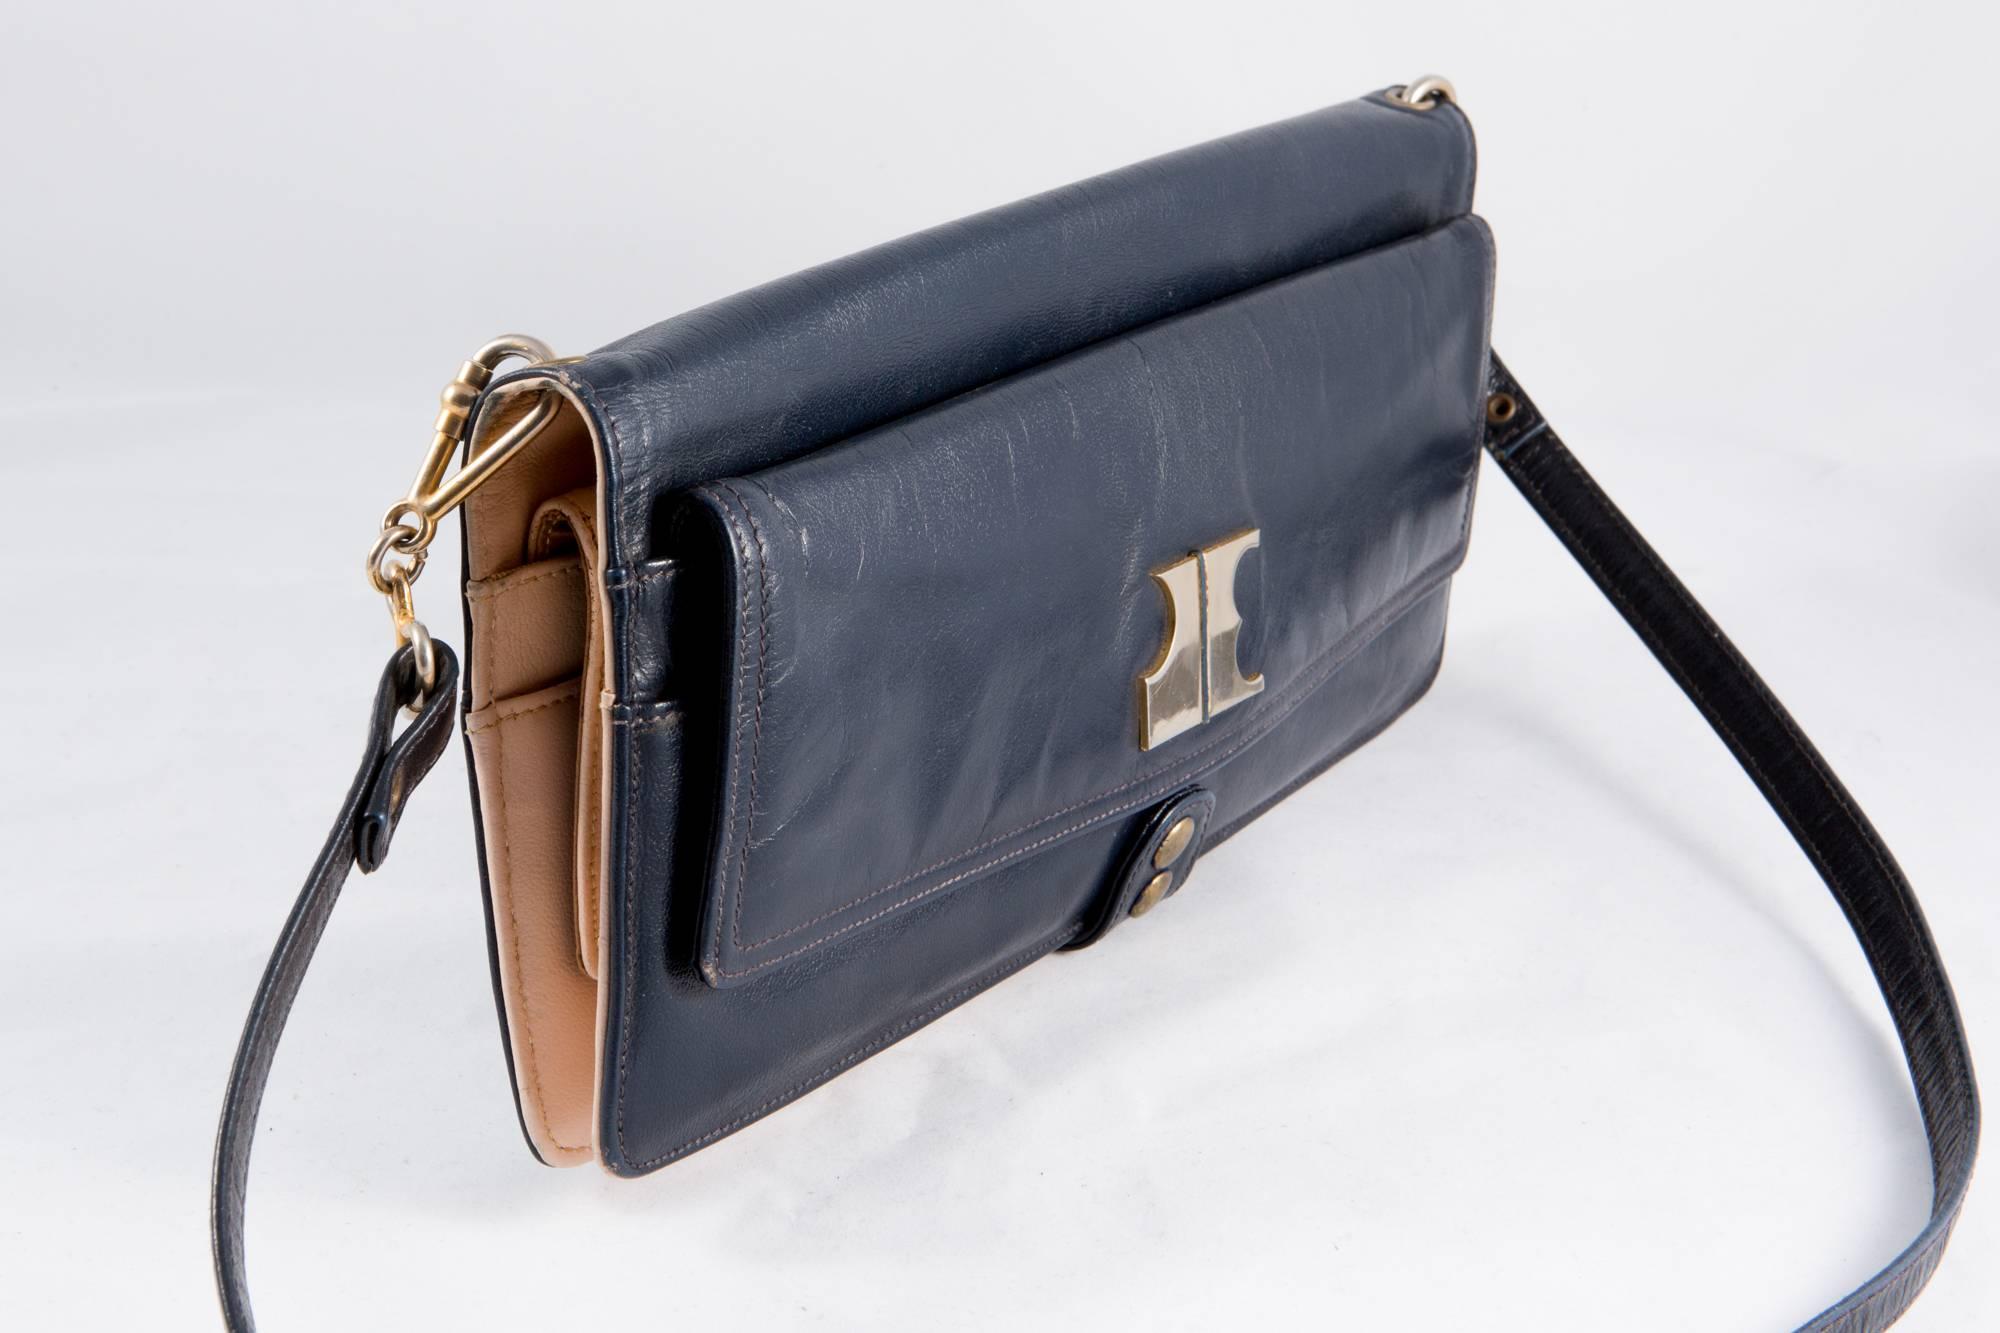 Jacques Esterel 1970s navy and cream long baguette bag featuring detachable shoulder strap with silver tone hooks,, many zipped pocket, a front silver tone front logo.
In good vintage condition. Made in Belgium.
Length 12,9 in. (33cm)
Height 5.5in.